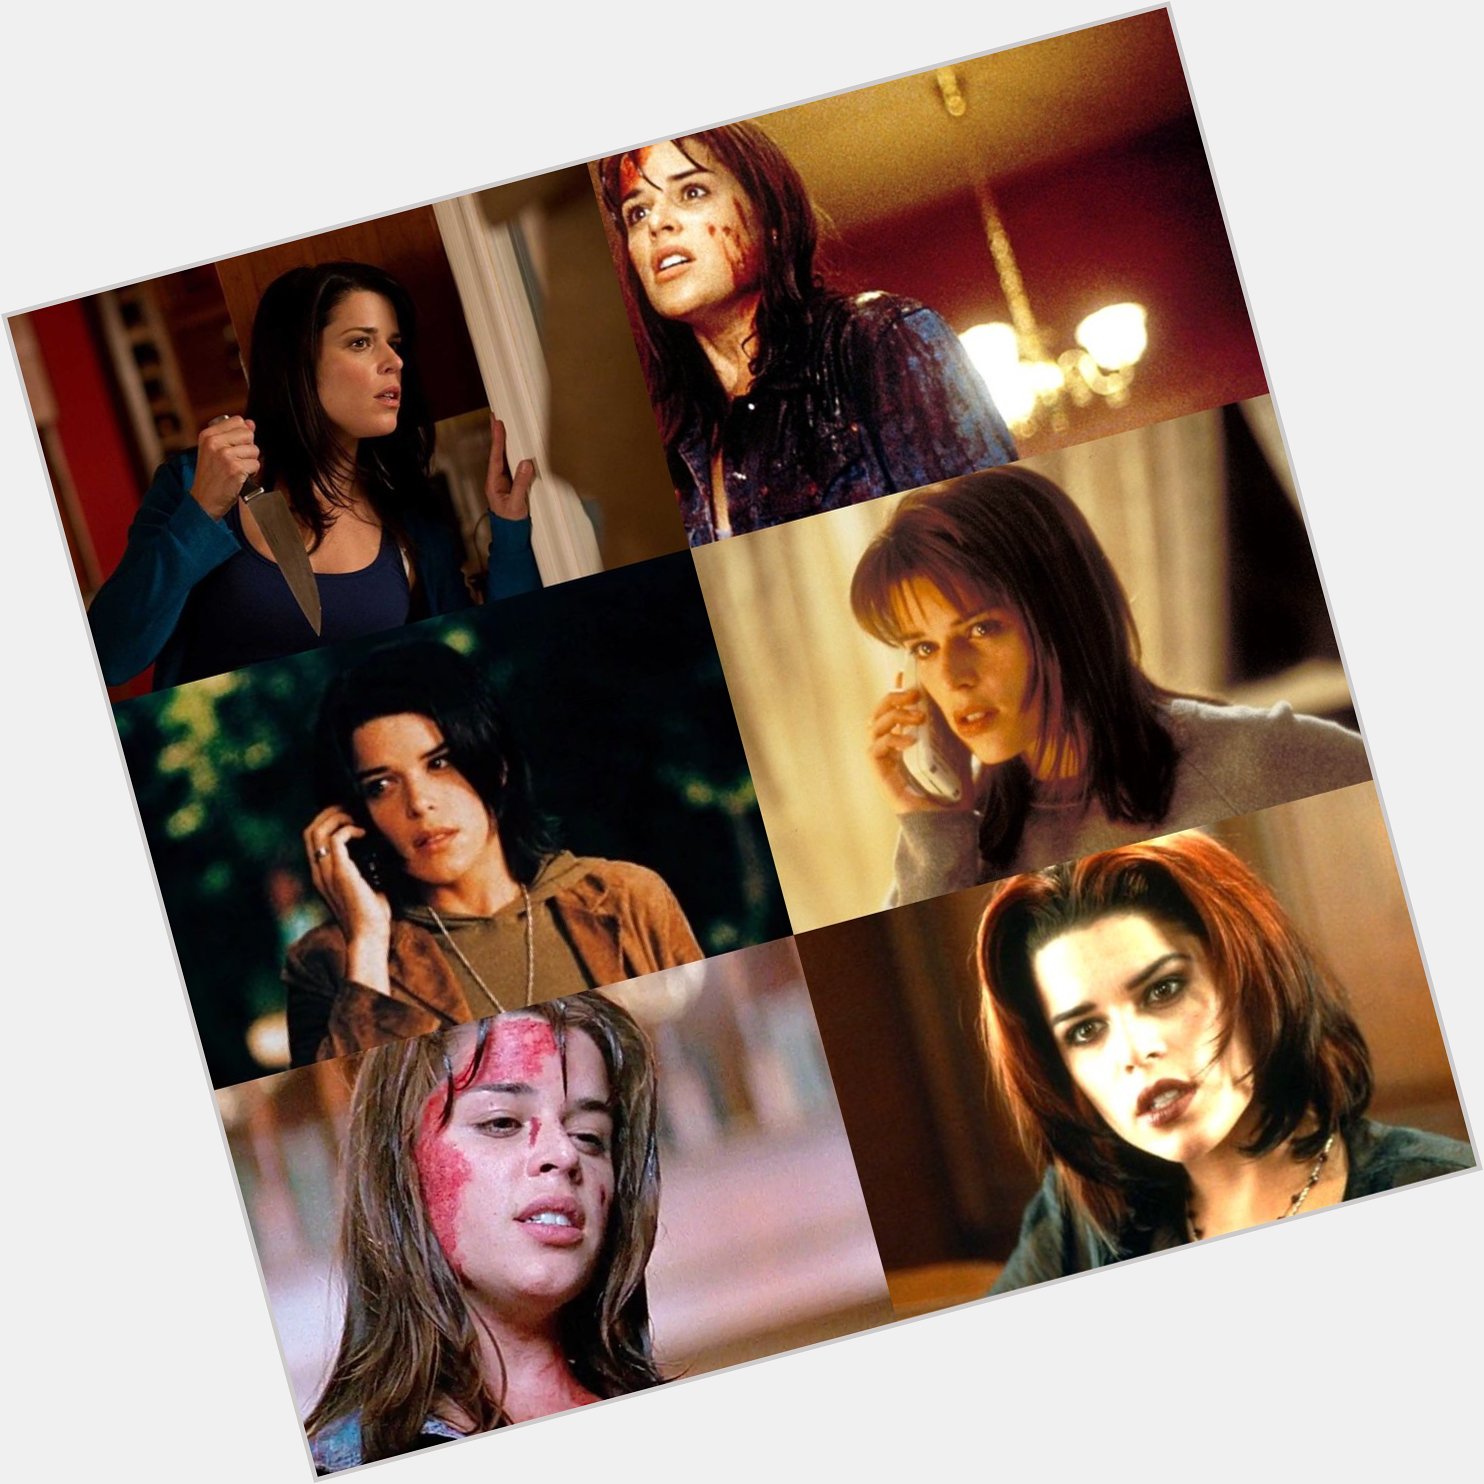 Happy horror birthday to one of our favorite scream queens, Neve Campbell! 

What\s your favorite movie of hers? 